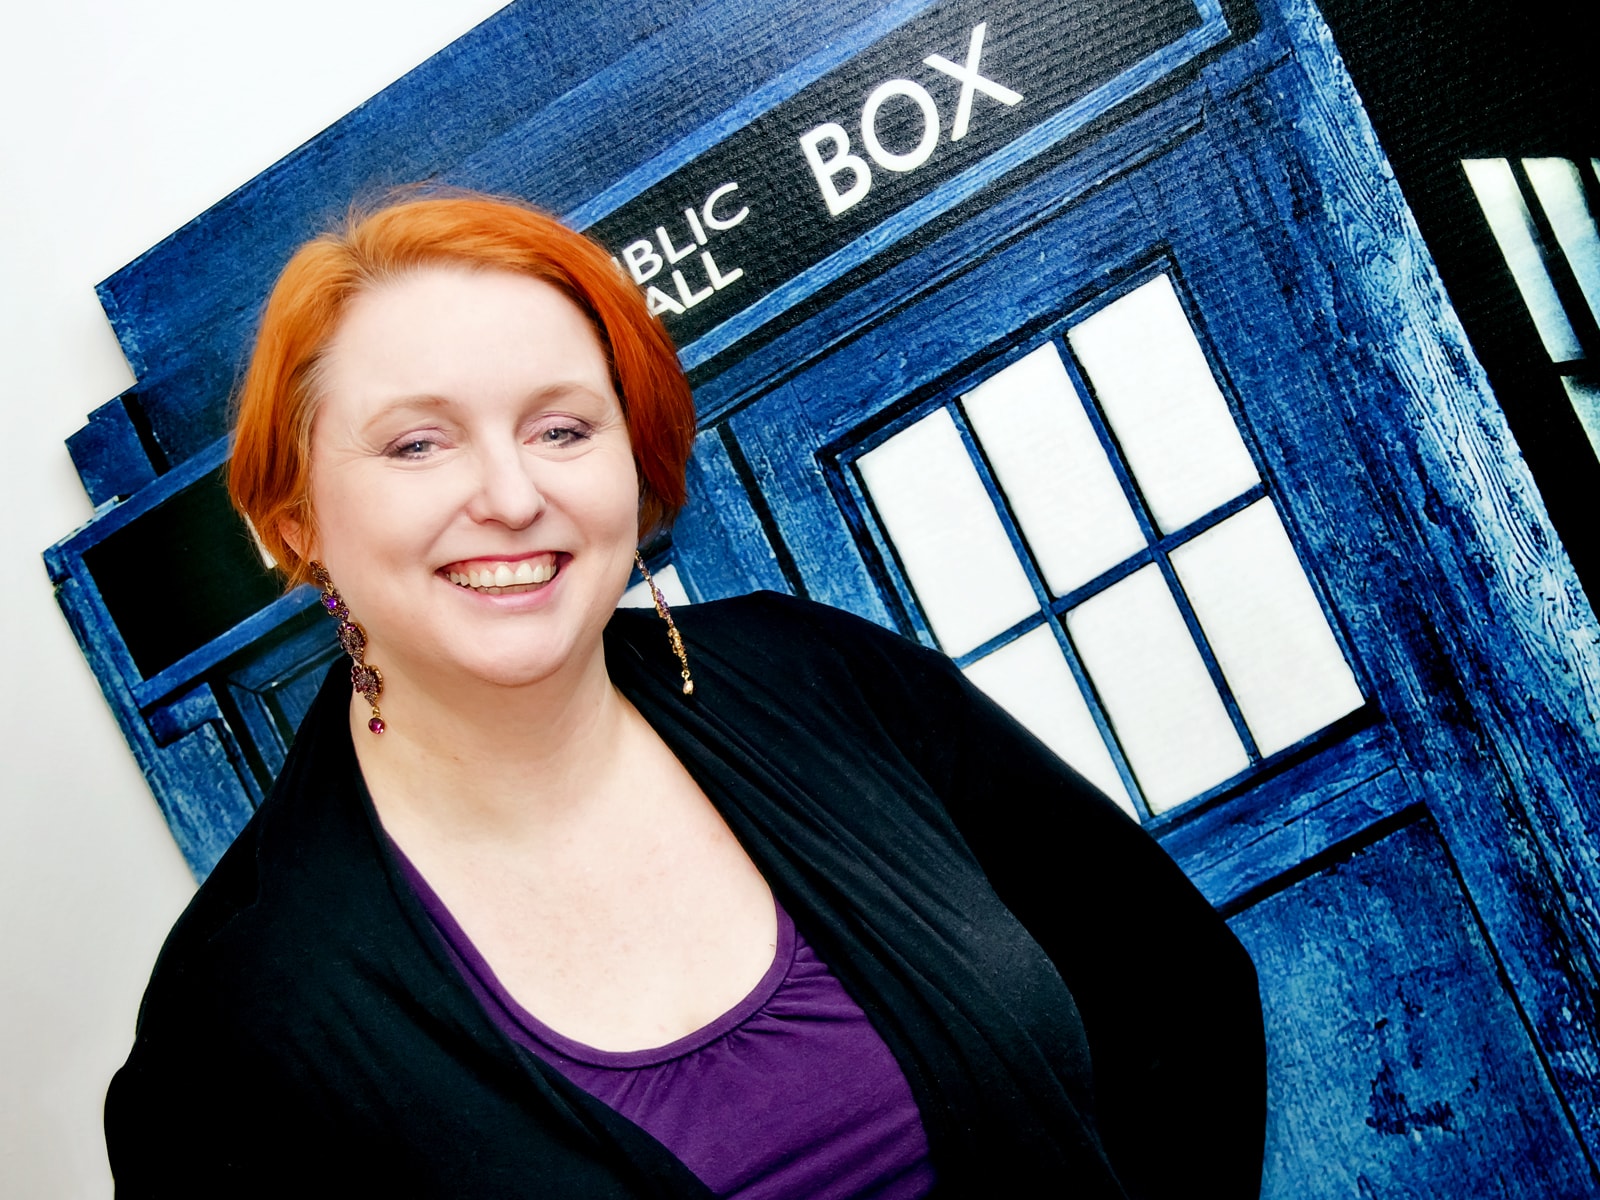 DigiPen lecturer Sonia Michaels smiling in front of the Dr. Who Tardis (a blue police box time machine) cutout in her office